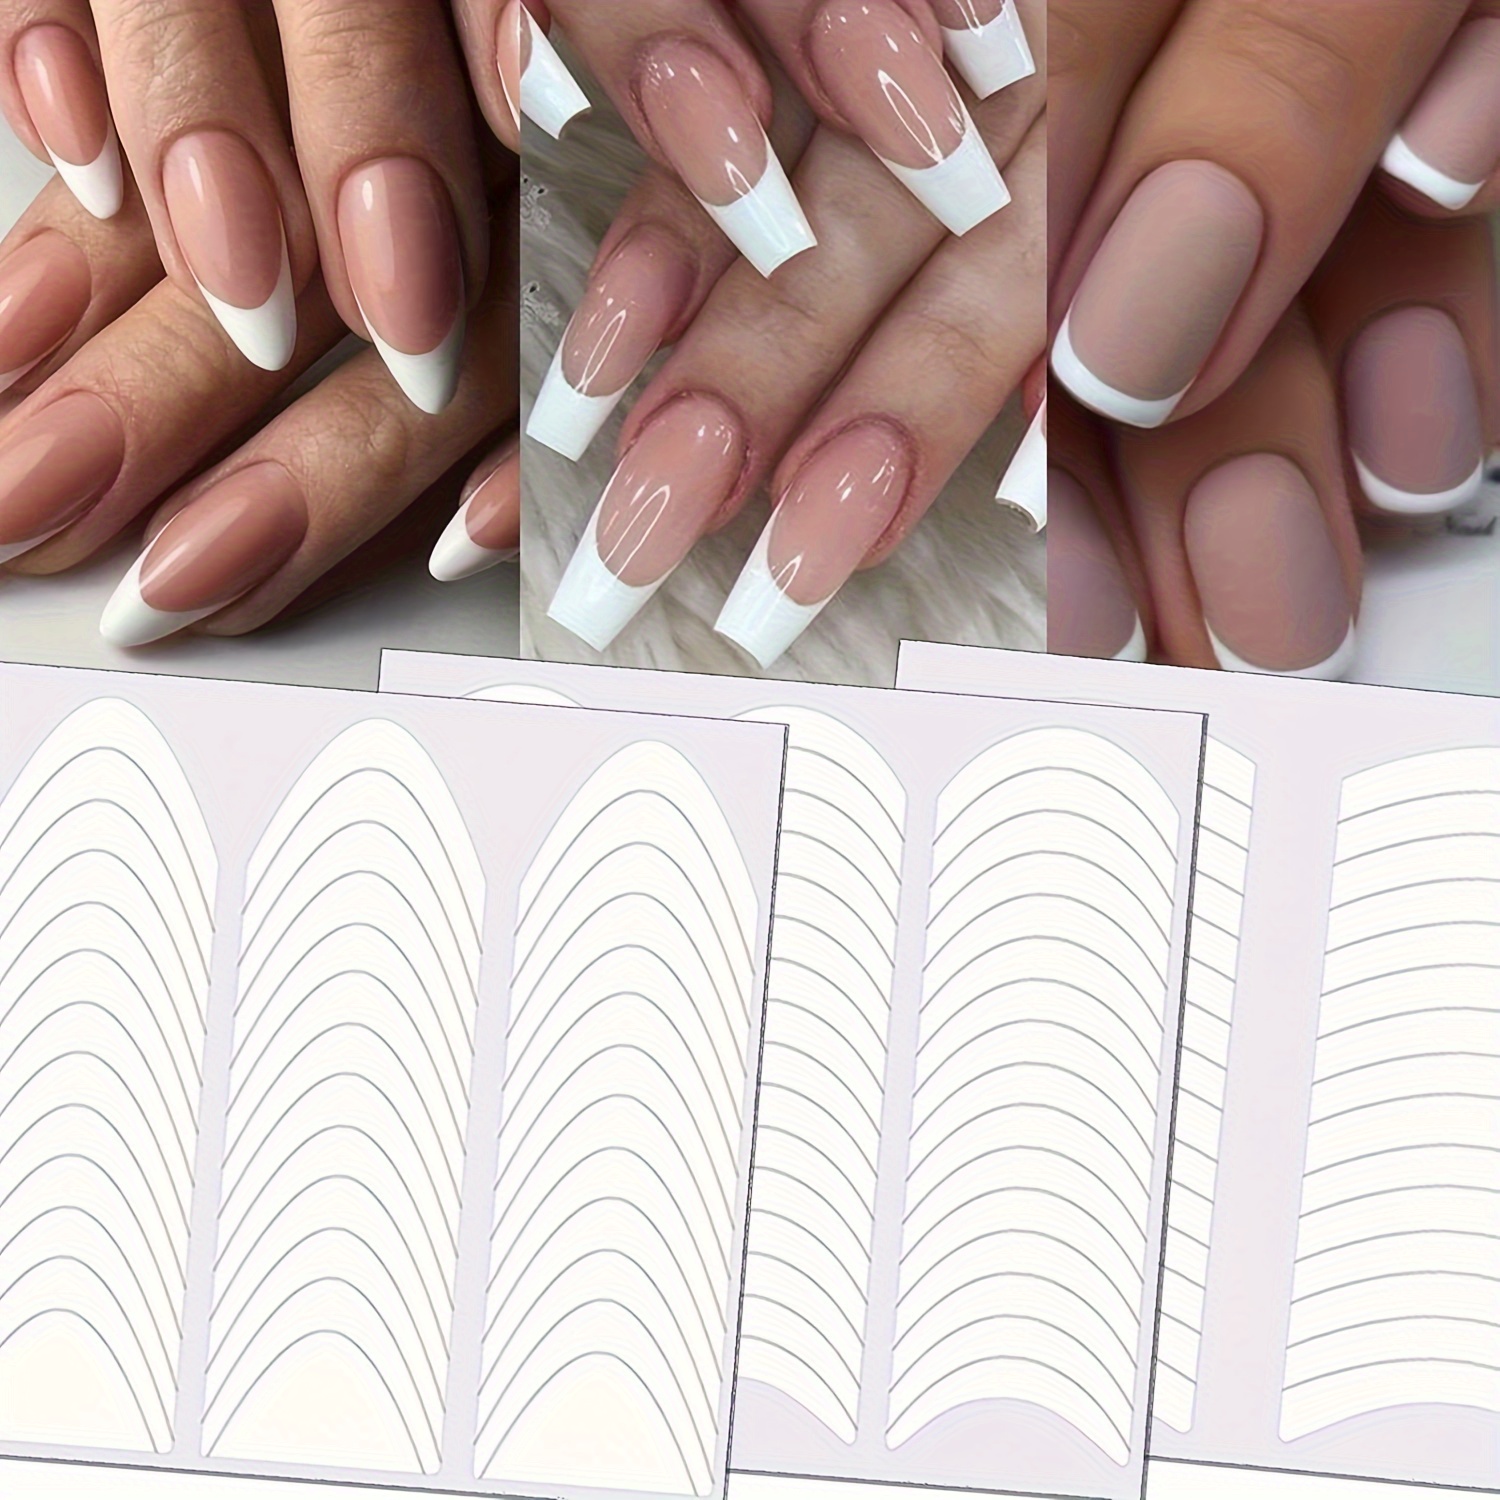 

730pcs French Manicure Nail Art Stickers - Self-adhesive Nail Tips Guides For Nail Art Decoration And Stencil Tools